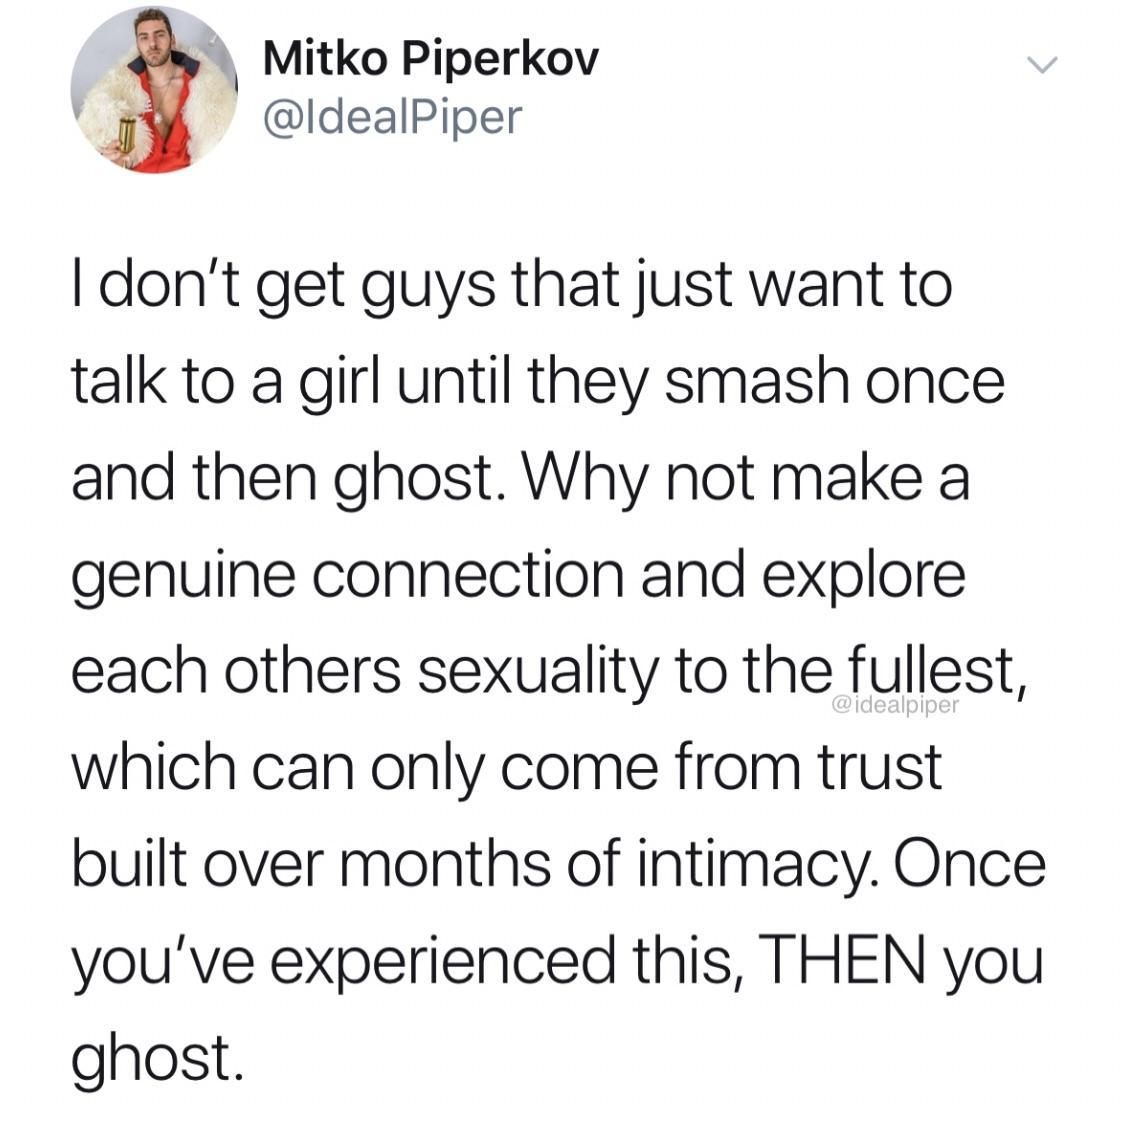 tinder - point - Mitko Piperkov I don't get guys that just want to talk to a girl until they smash once and then ghost. Why not make a genuine connection and explore each others sexuality to the fullest, which can only come from trust built over months of